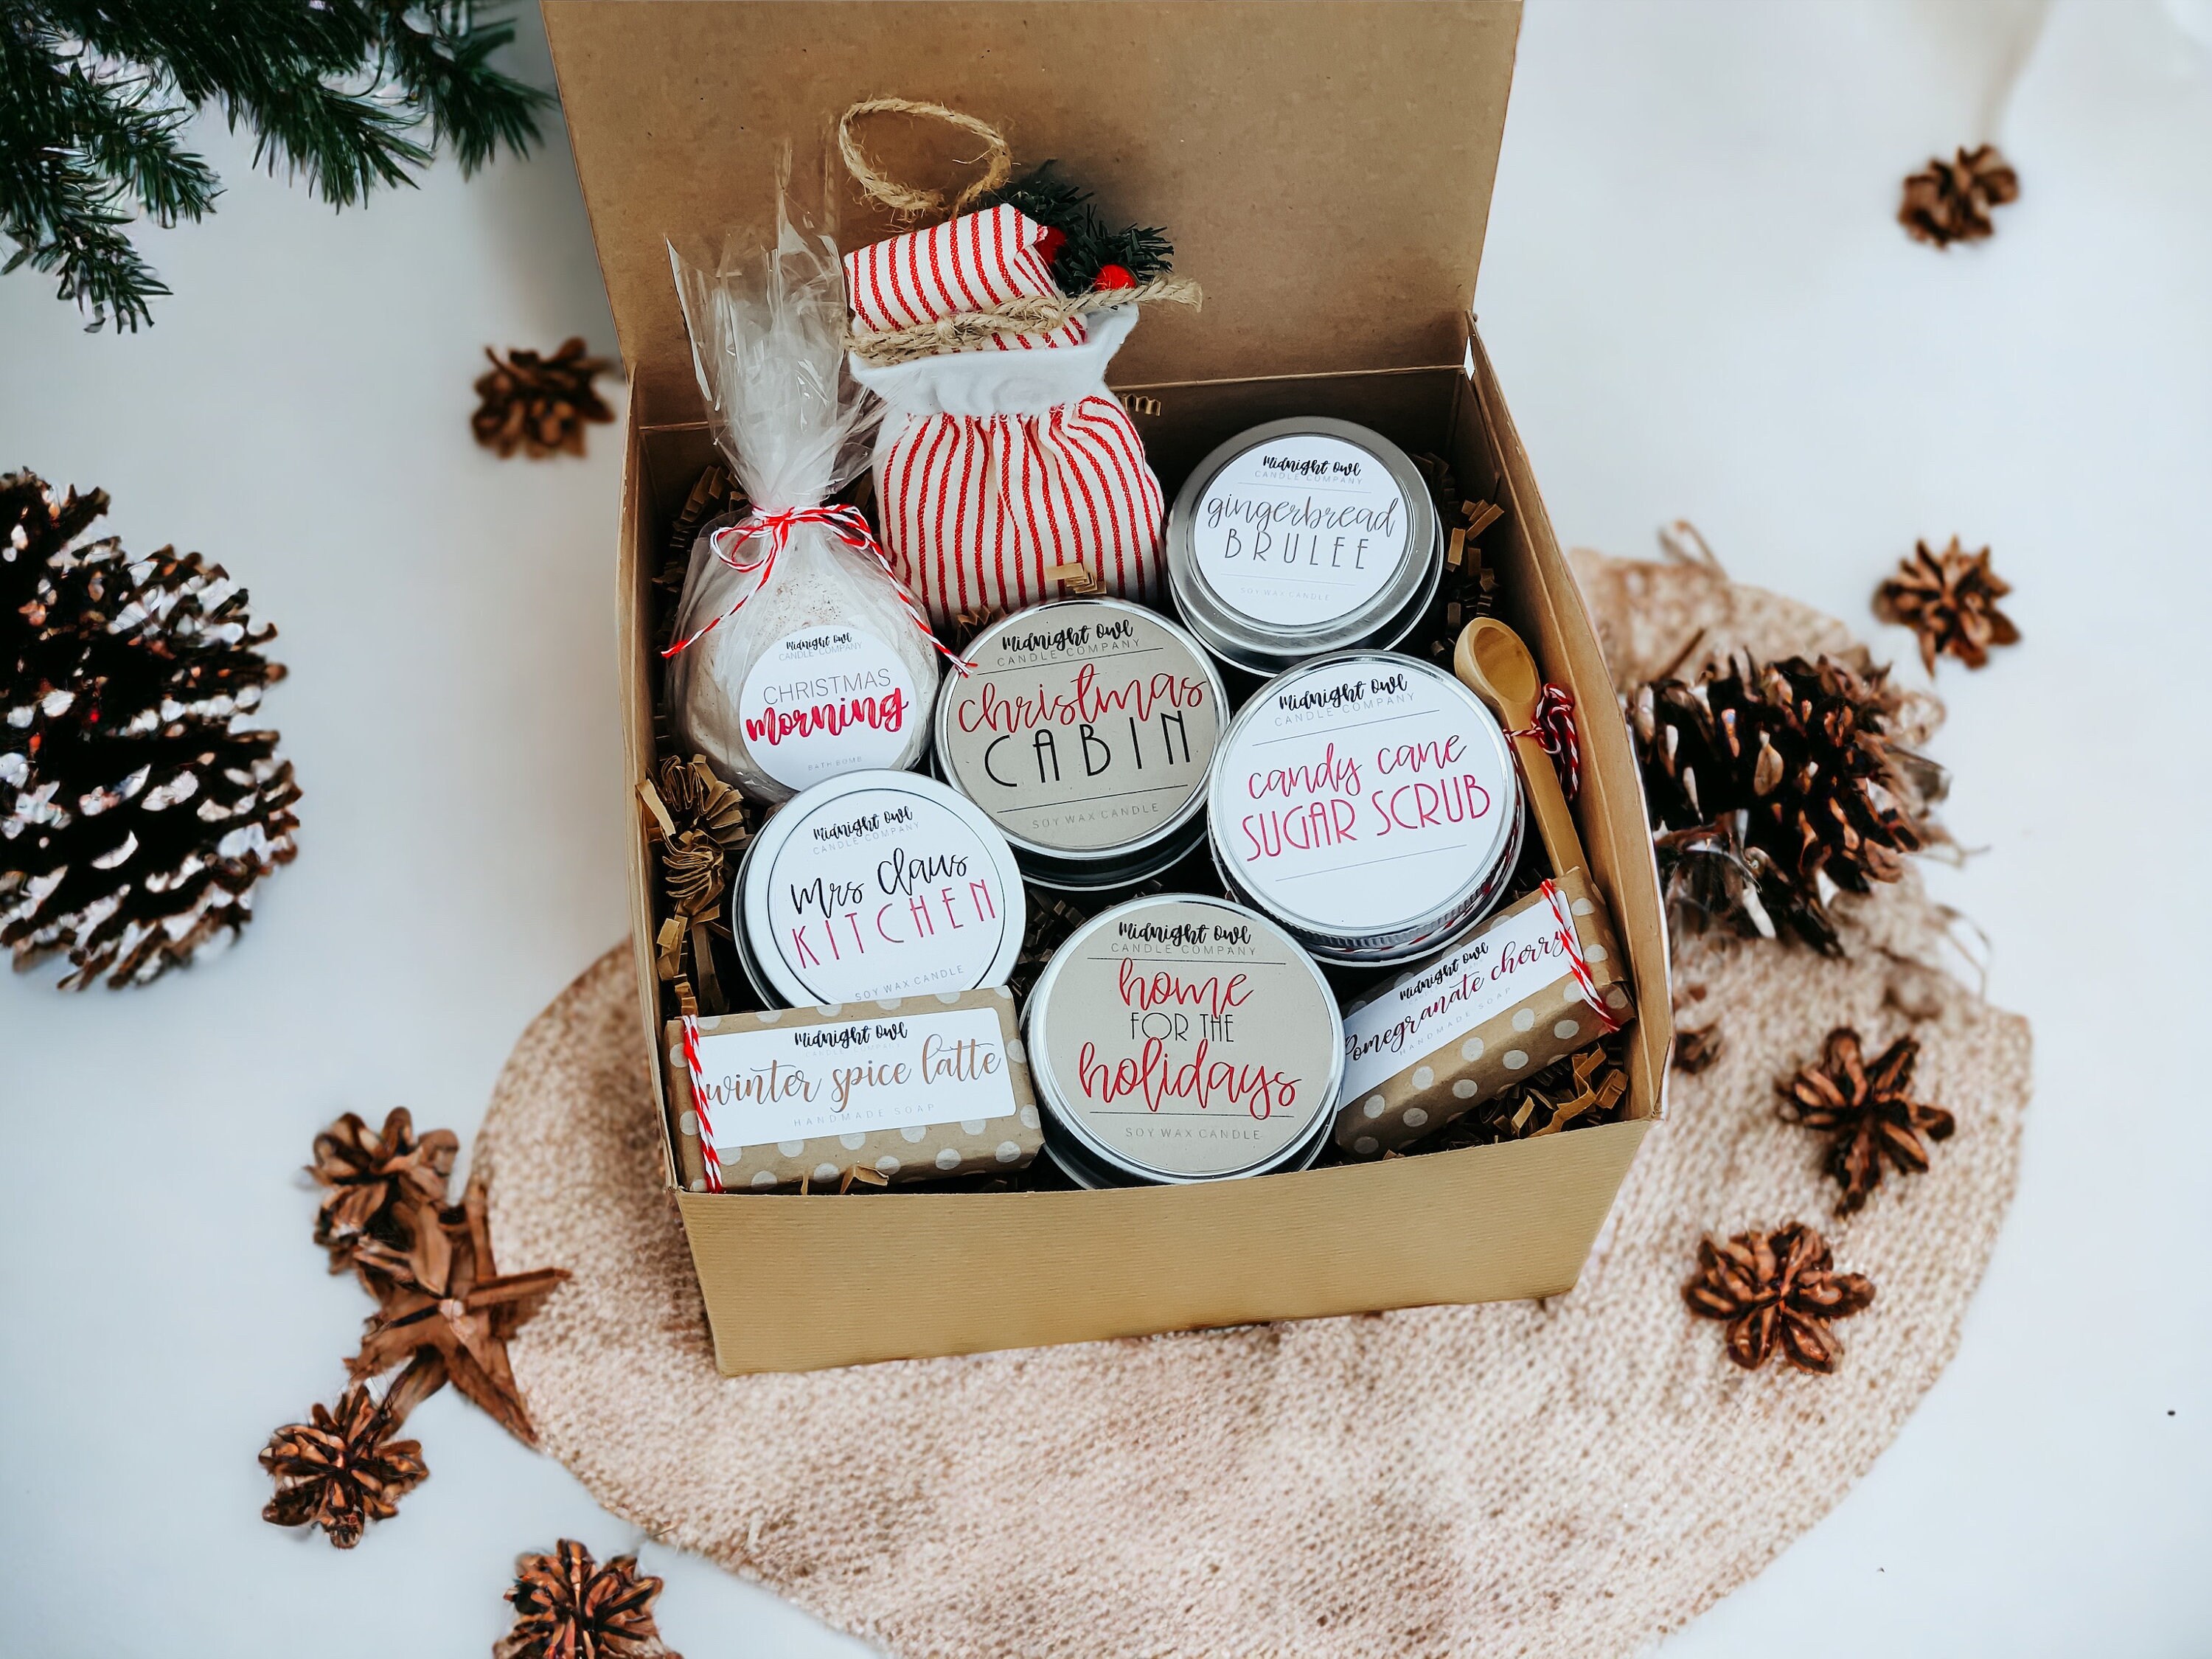  Christmas Spa Gifts for Women - Christmas Gift Ideas, Christmas  Candles Gift, Christmas Gift Baskets for Women, Mom, Sister, Wife, Friend  with Candle, Bath Bombs, Bath Salt, Soaps, Christmas Packaging 